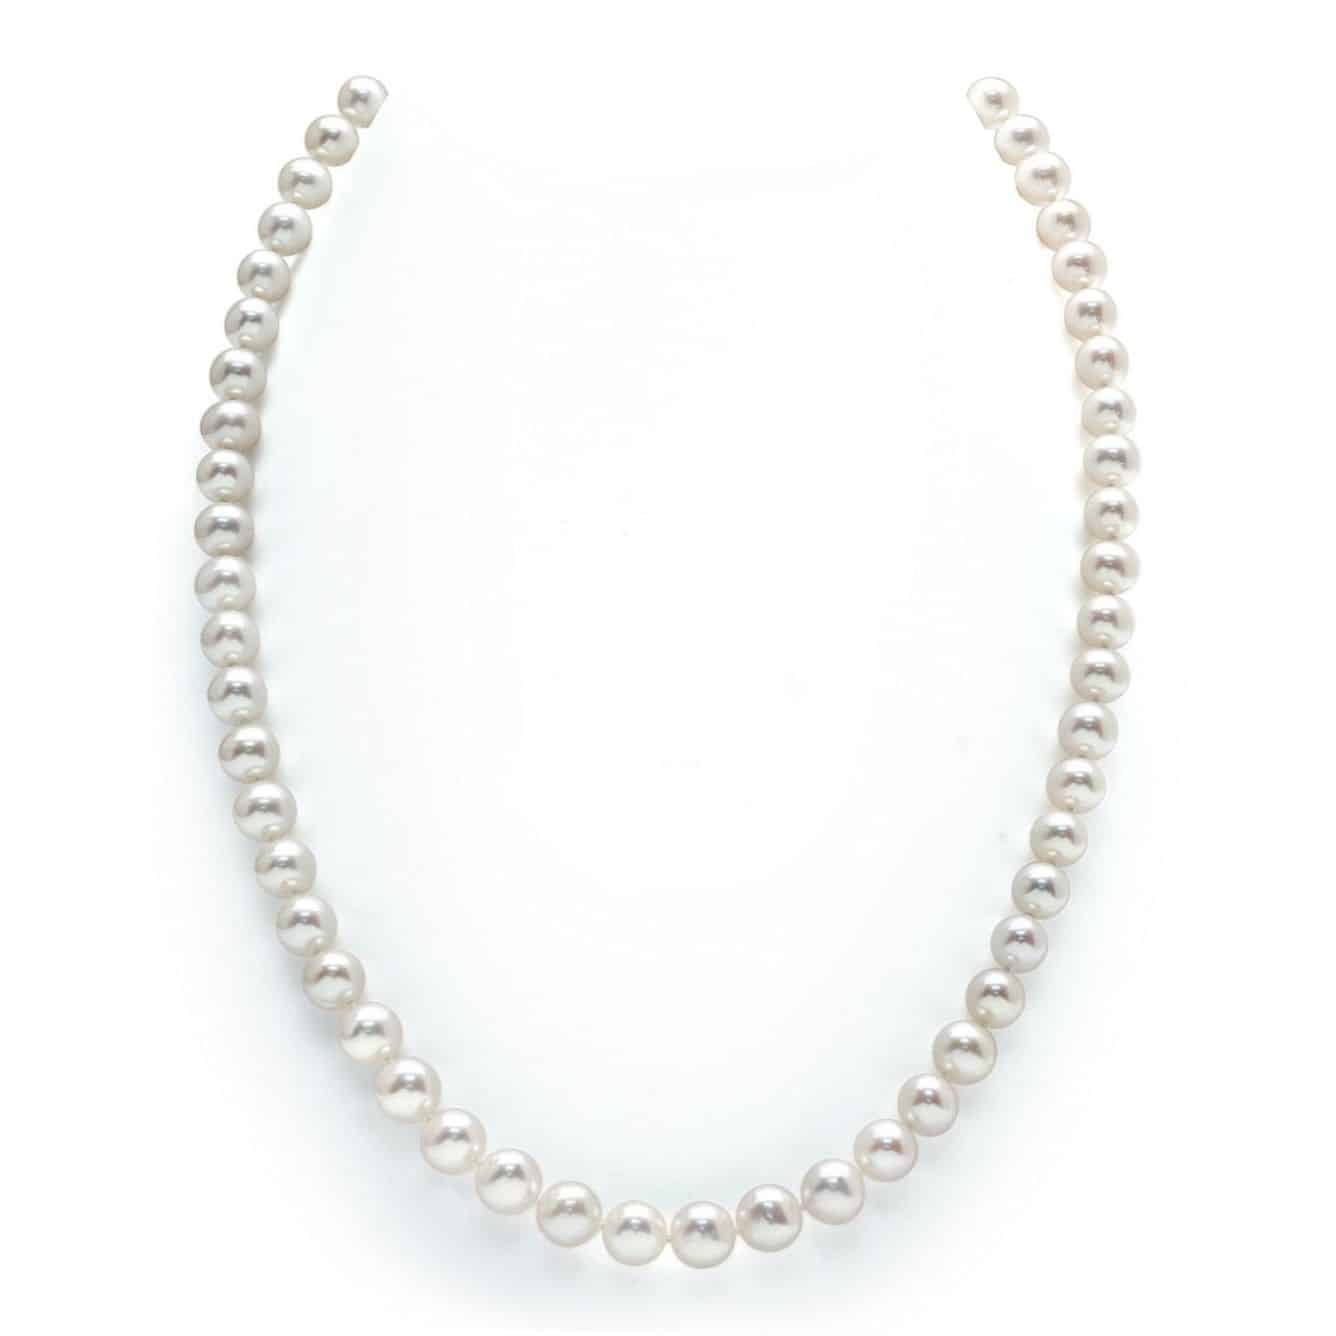 Radiance Pearl Necklace